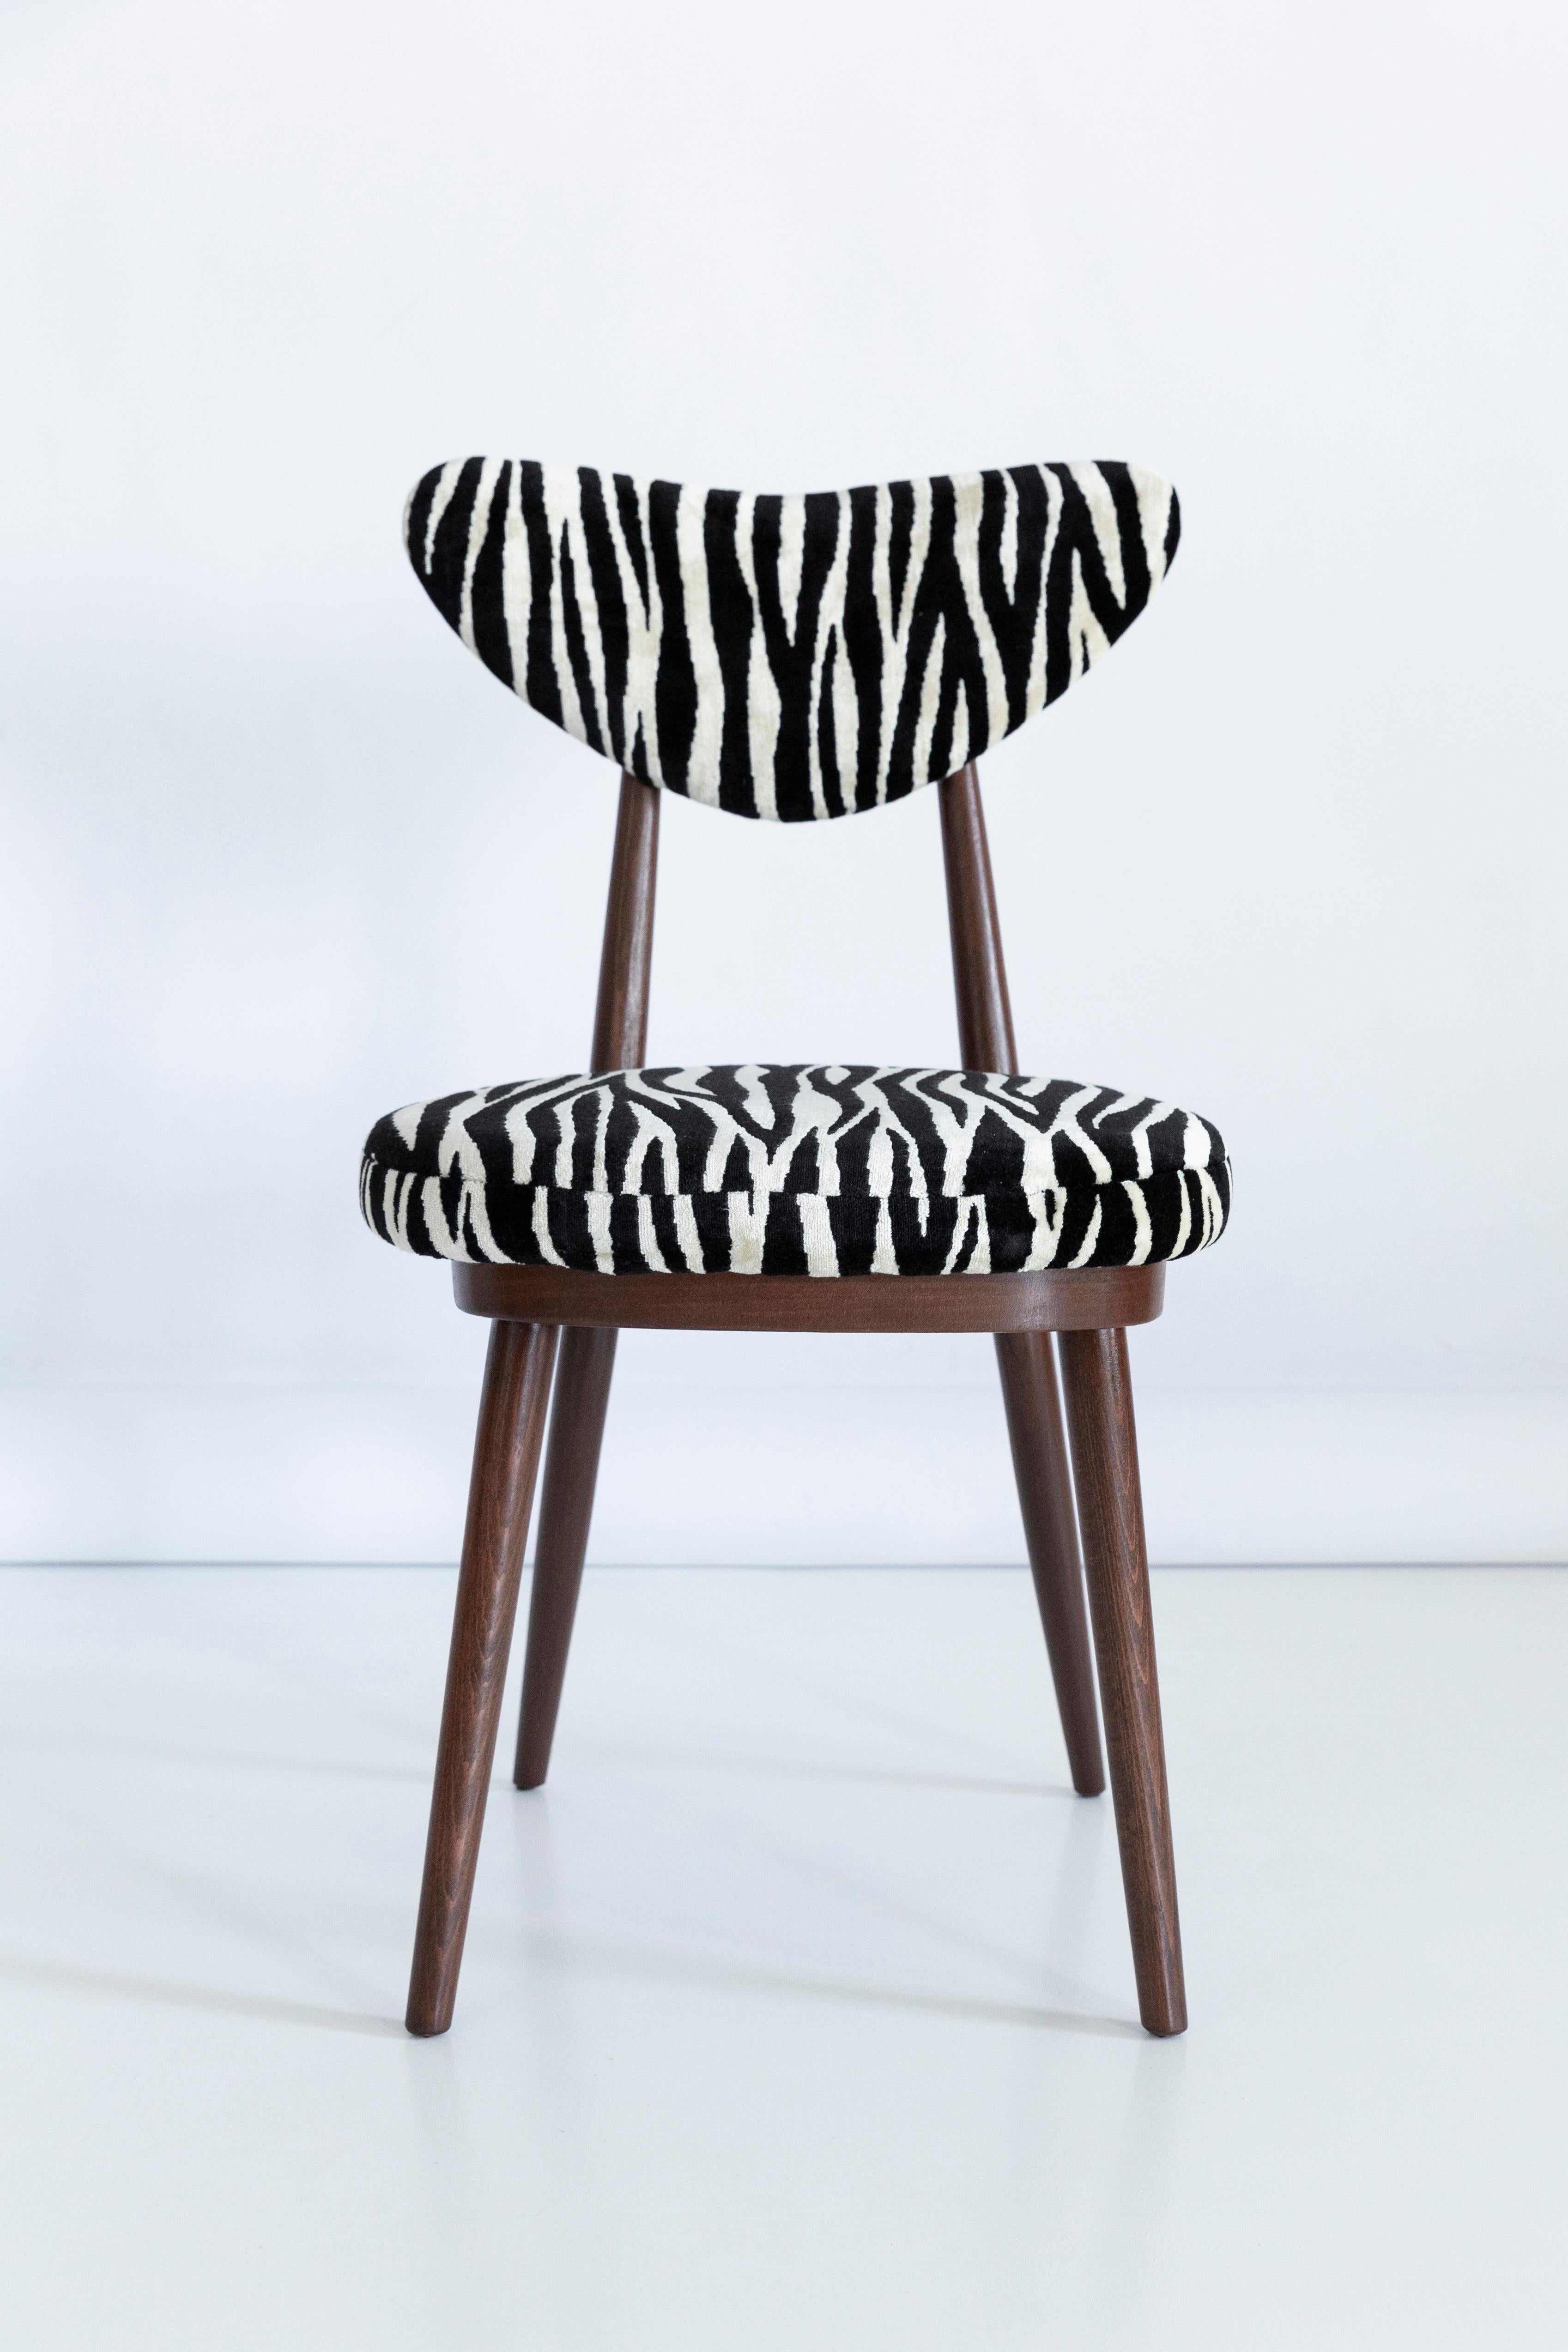 Set of Six Midcentury Zebra Black and White Heart Chairs, Poland, 1960s For Sale 10